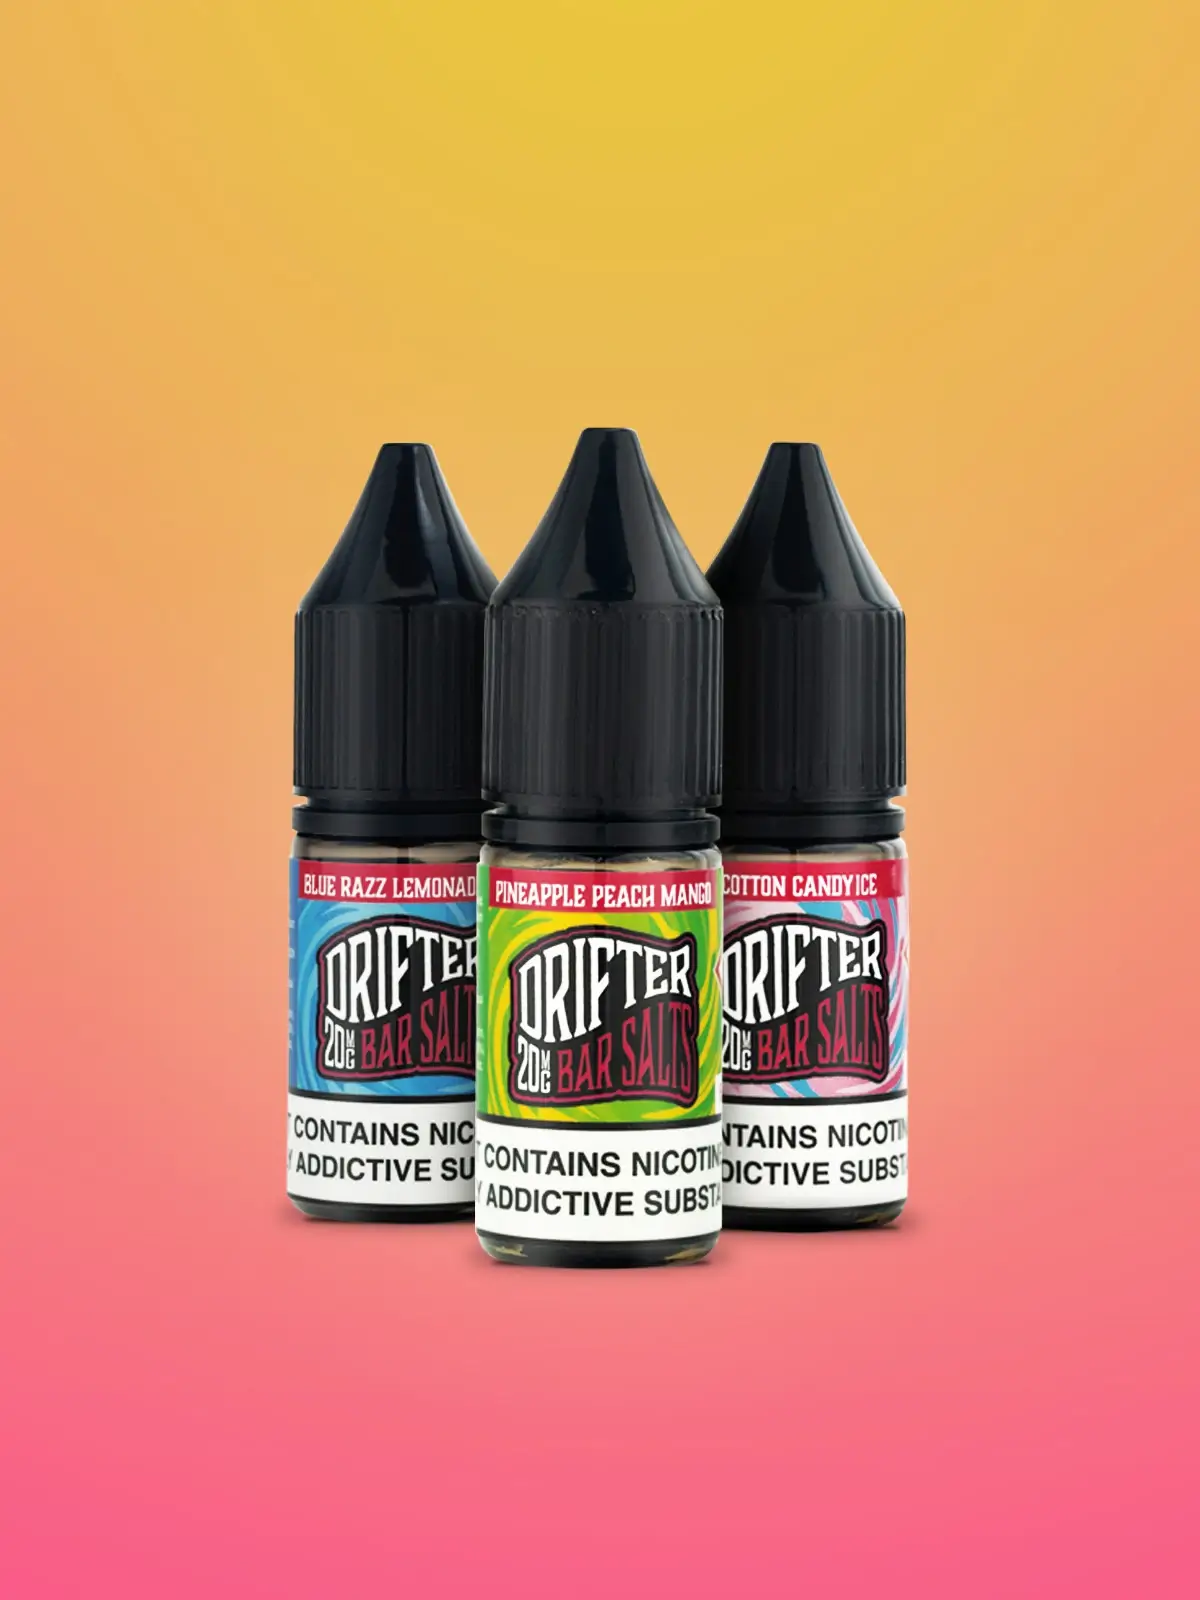 Three bottles of Drifter e-liquid standing next to each other in front of a pink and orange background